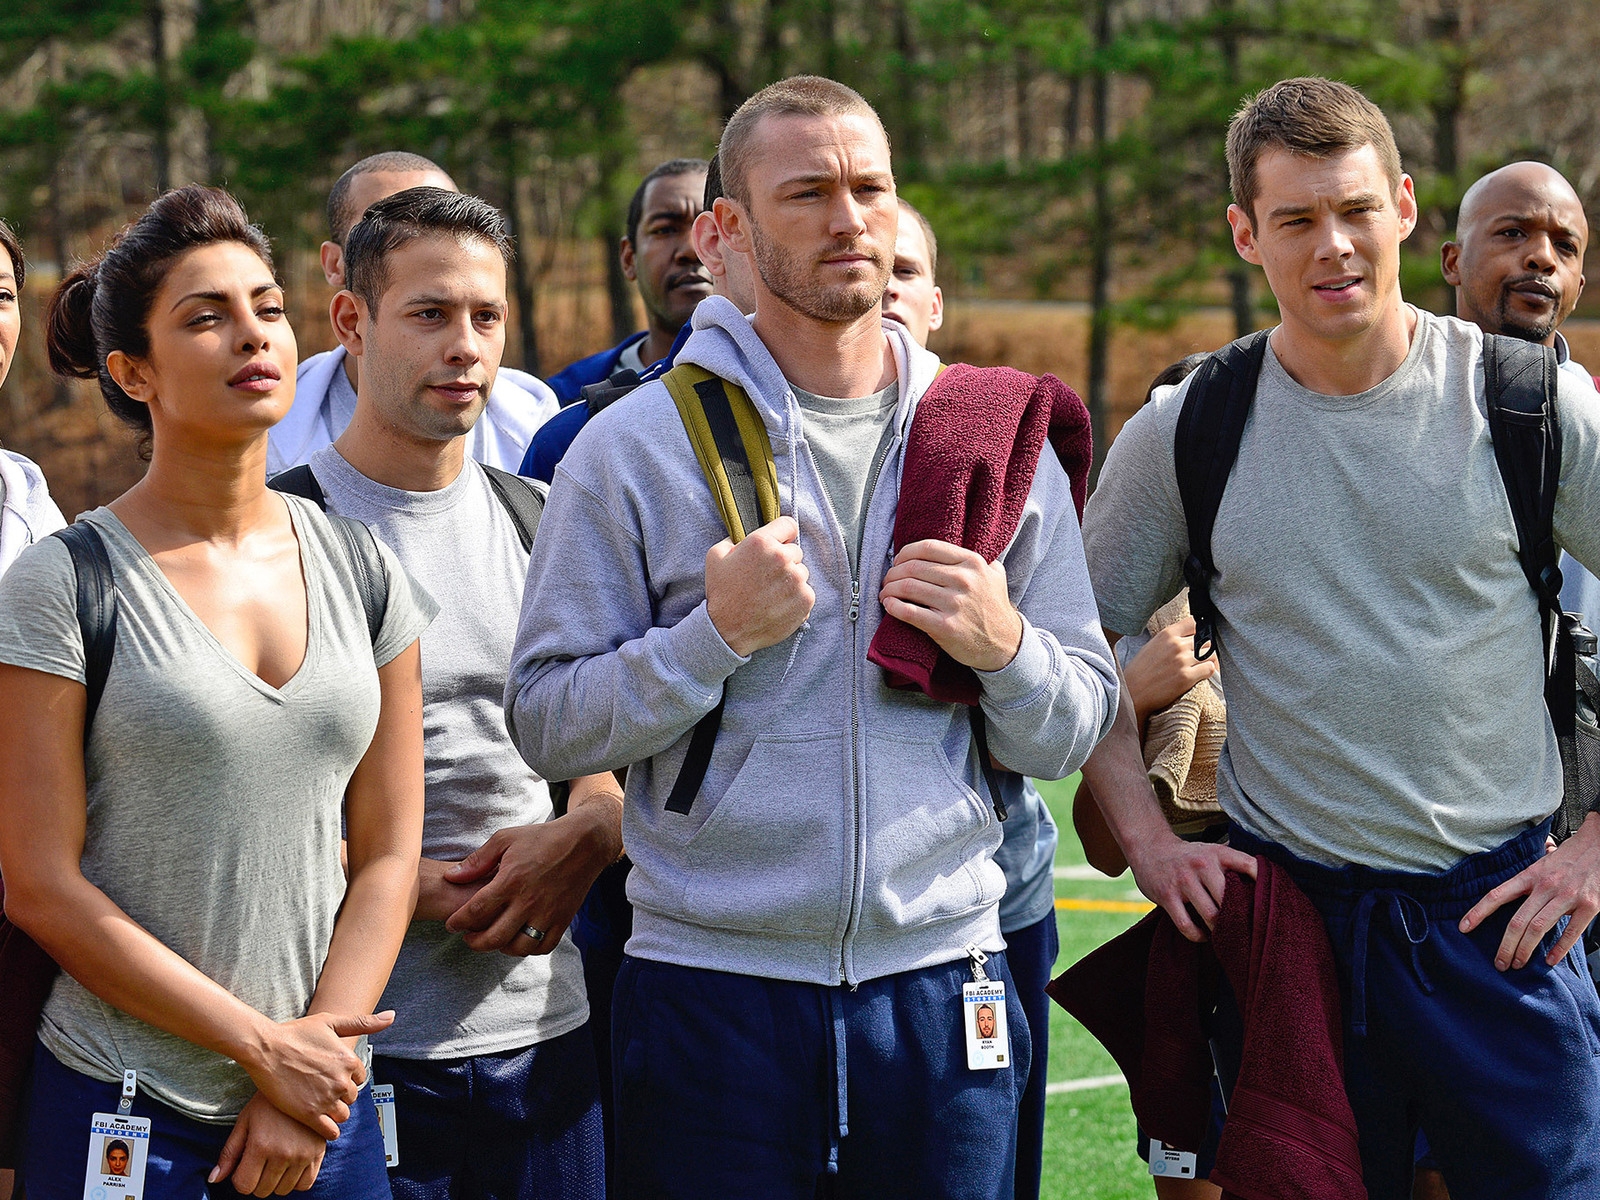 Quantico Characters for 1600 x 1200 resolution